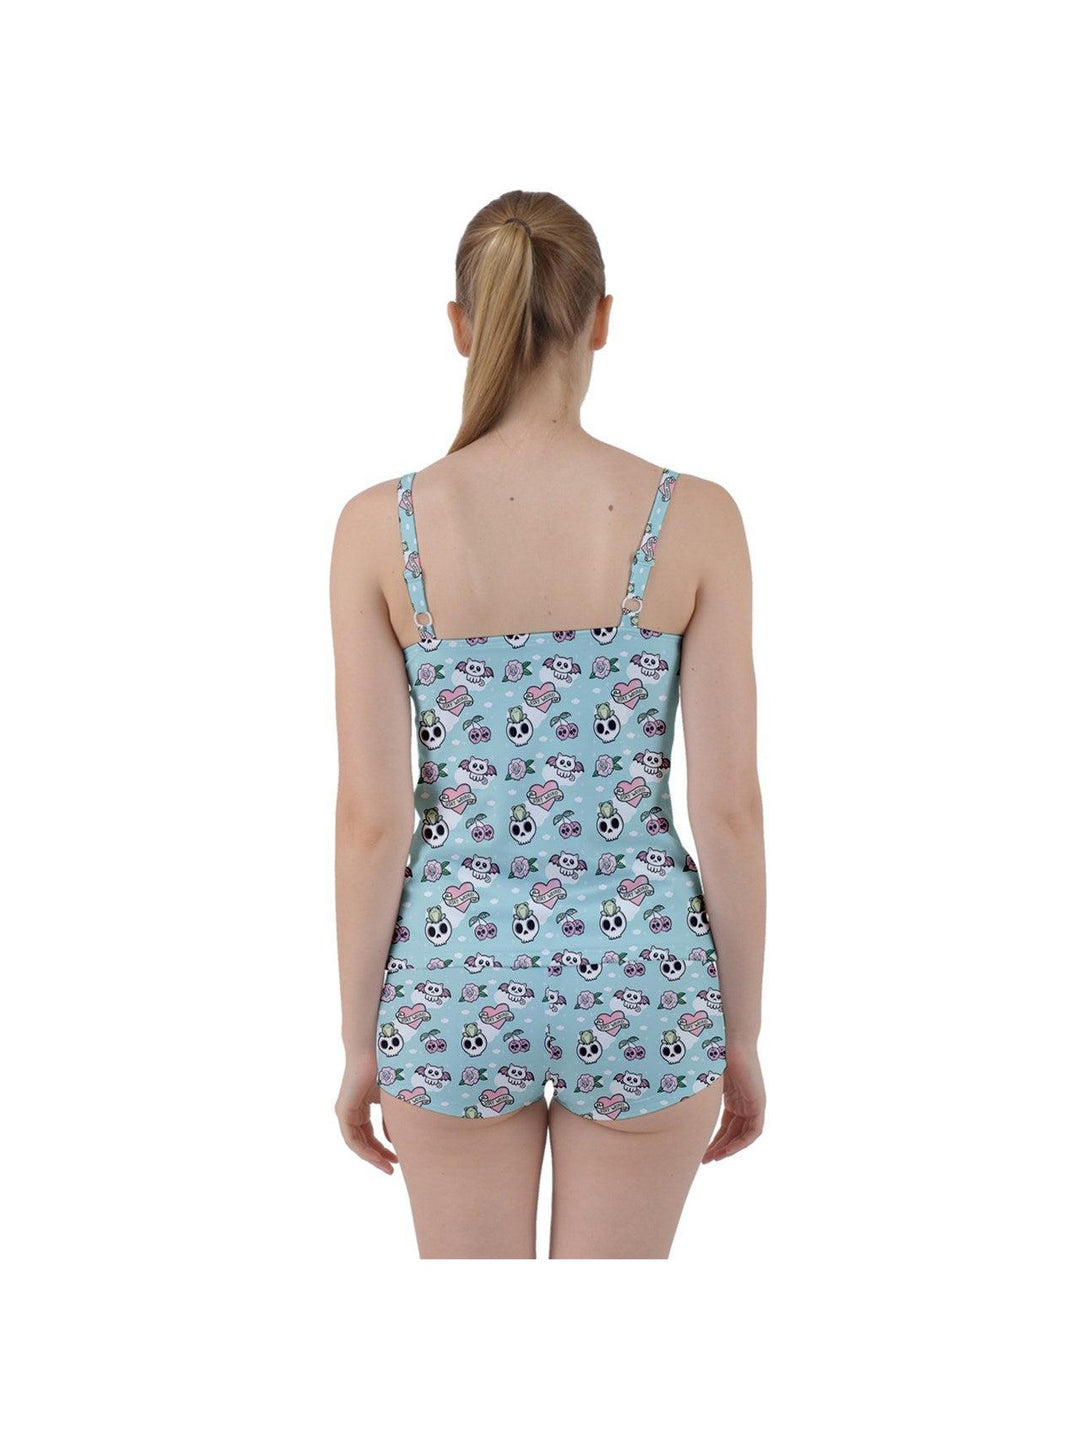 Stay Weird Tie Front Two Piece Tankini